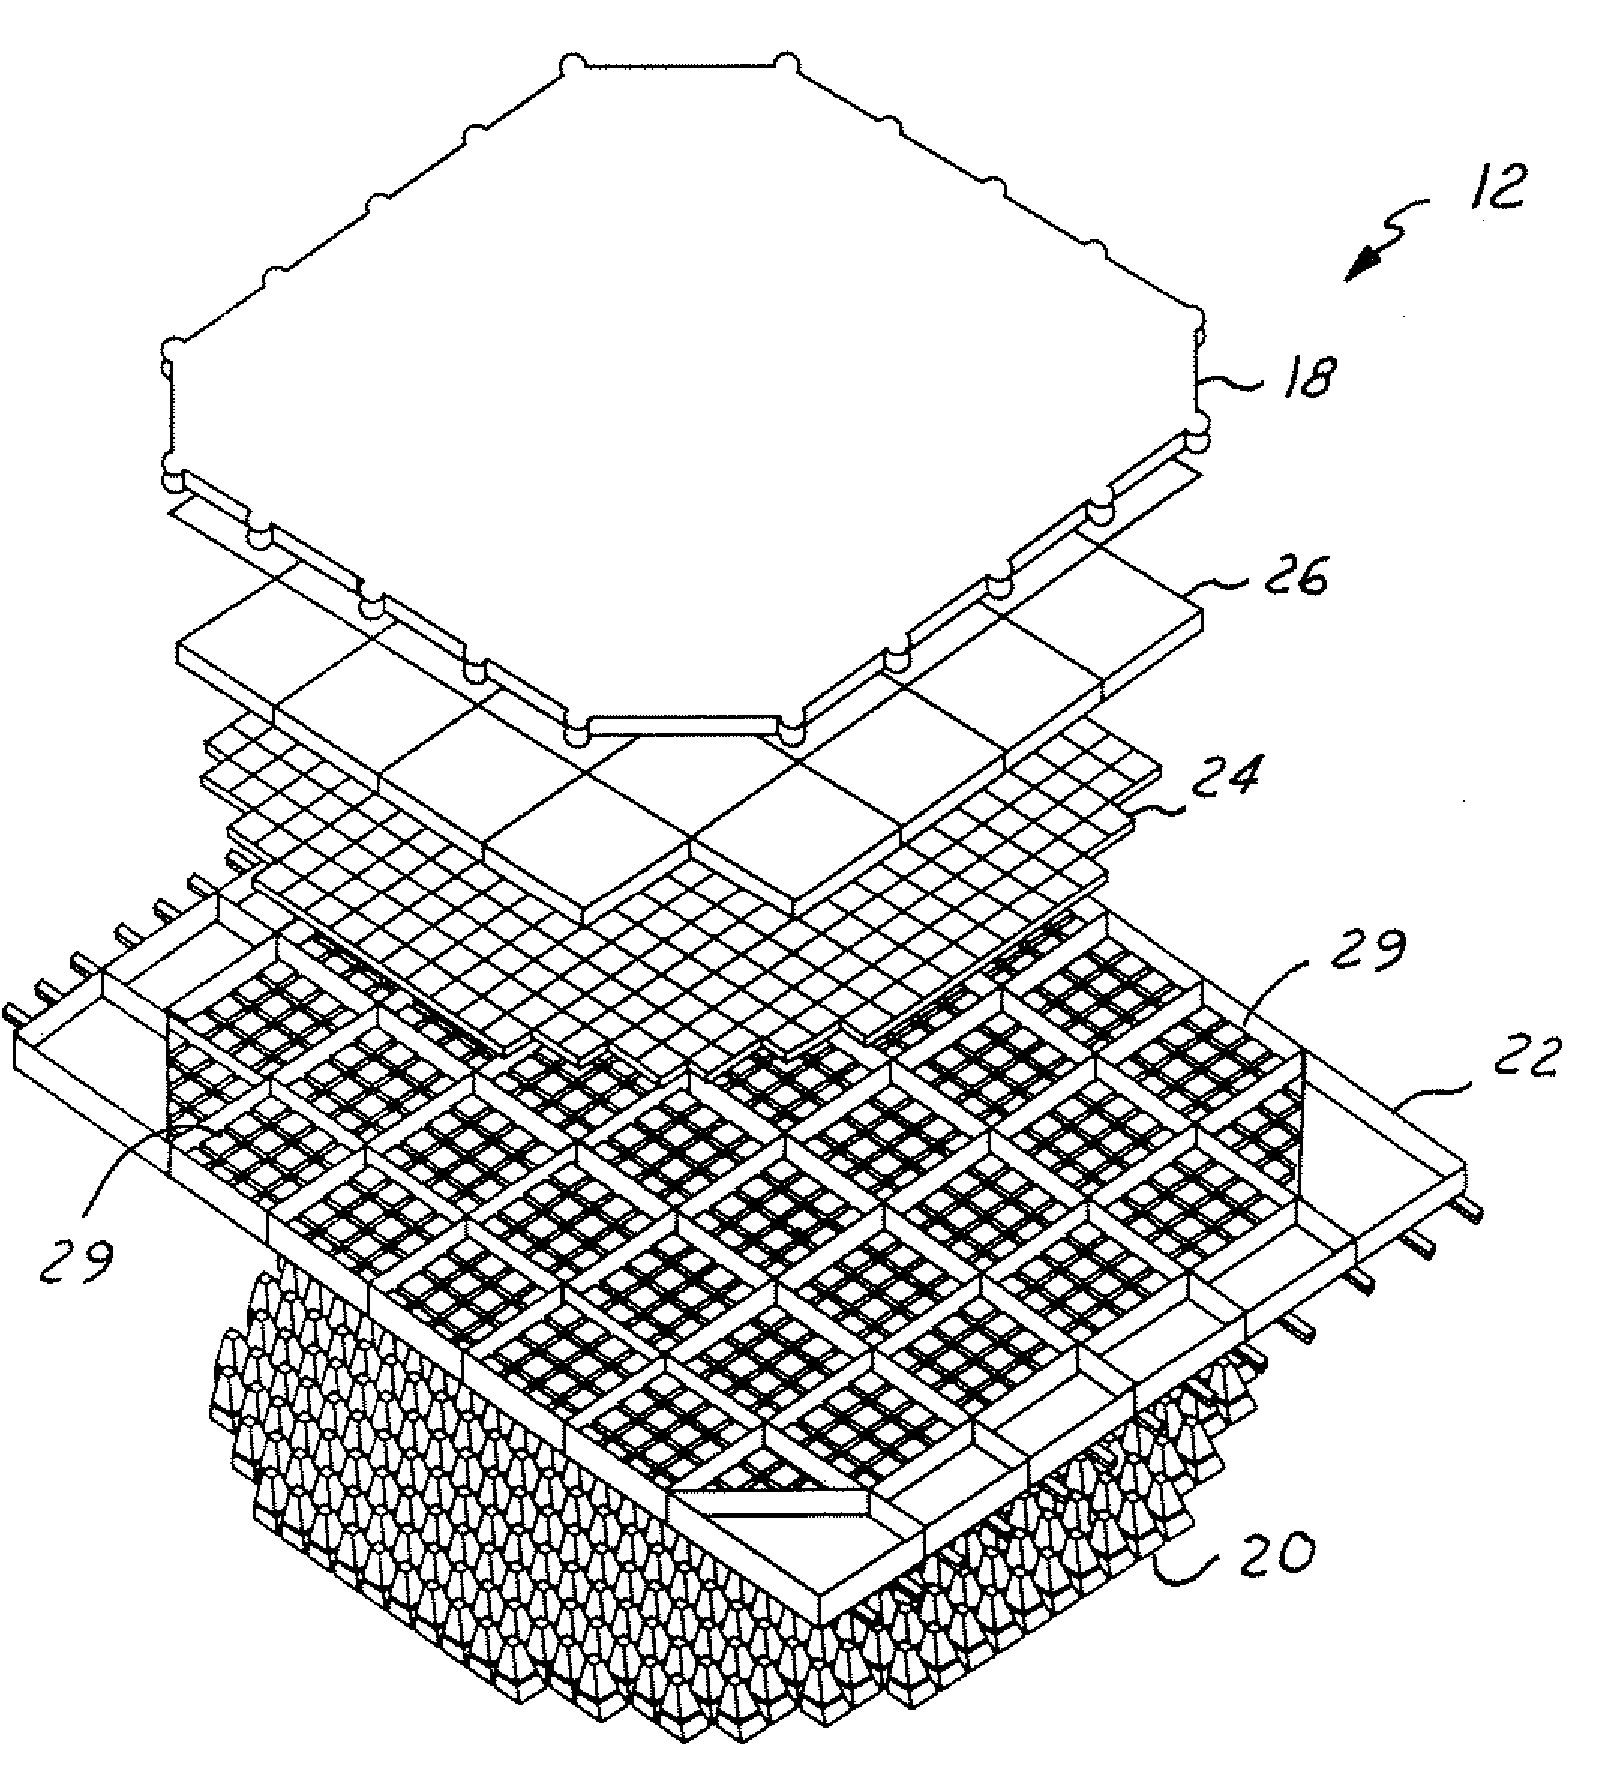 Beamforming Architecture For Multi-Beam Phased Array Antennas